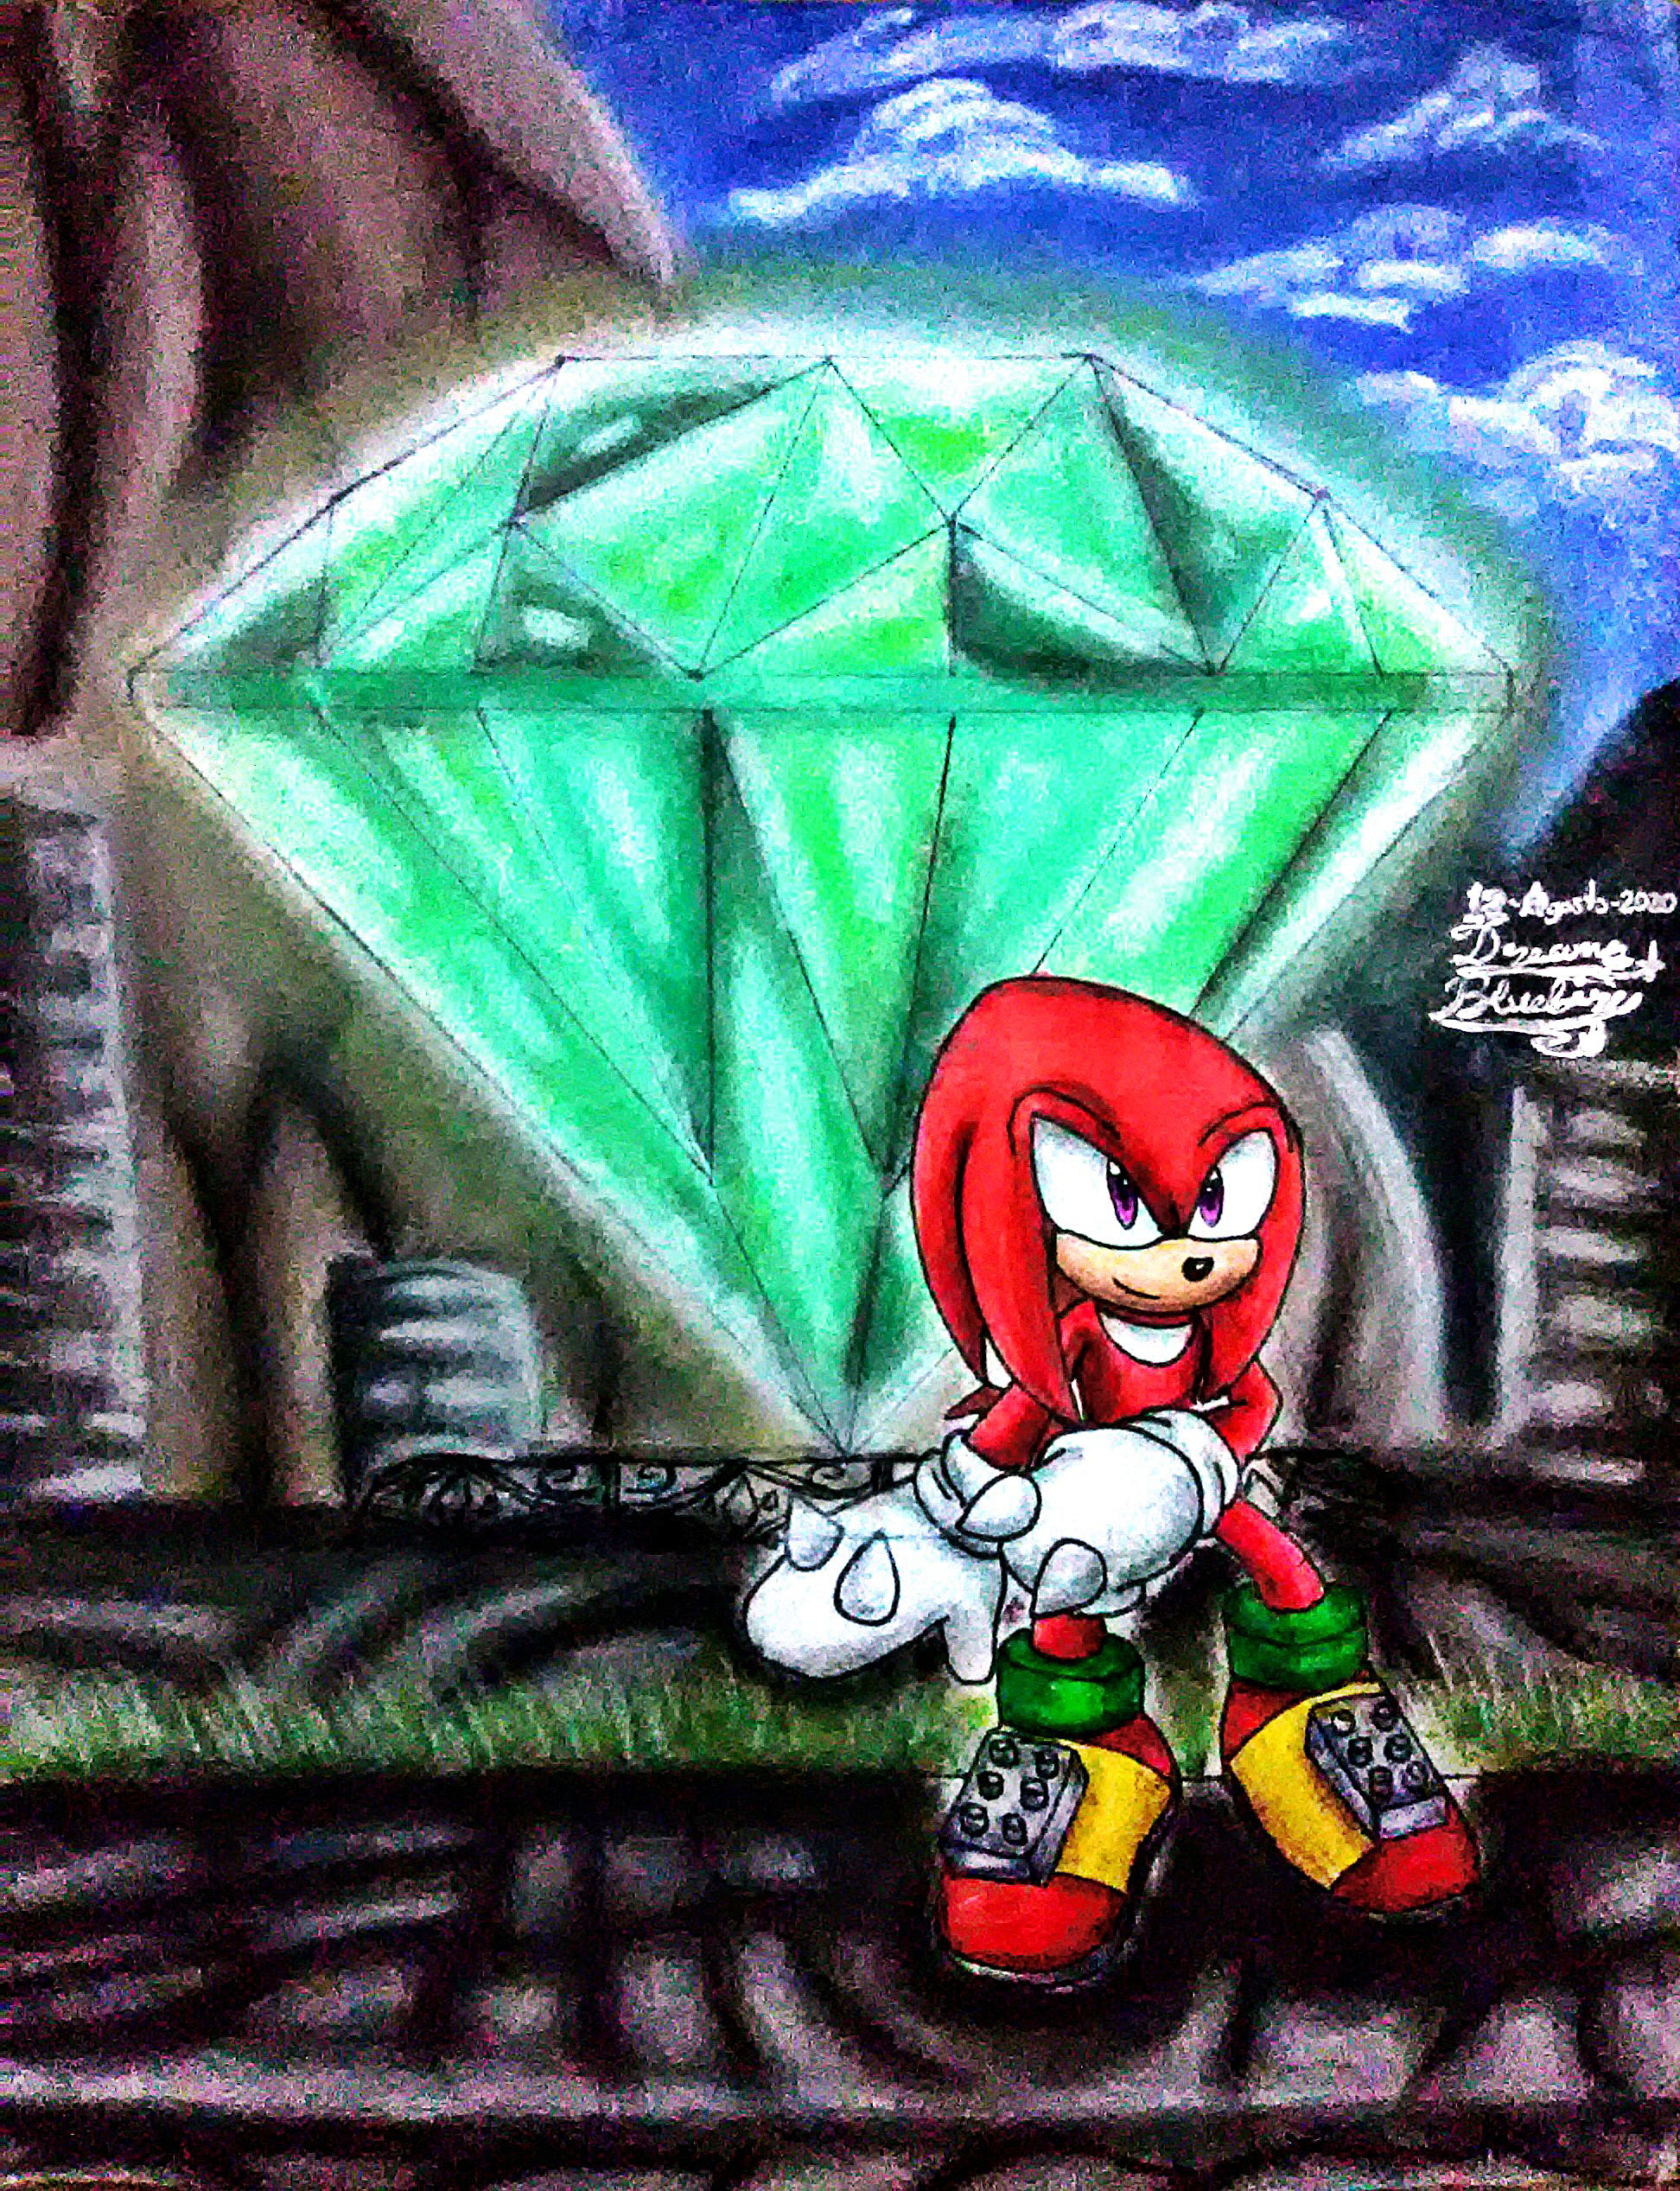 Knuckles The Echidna by DreamsBluefire on DeviantArt